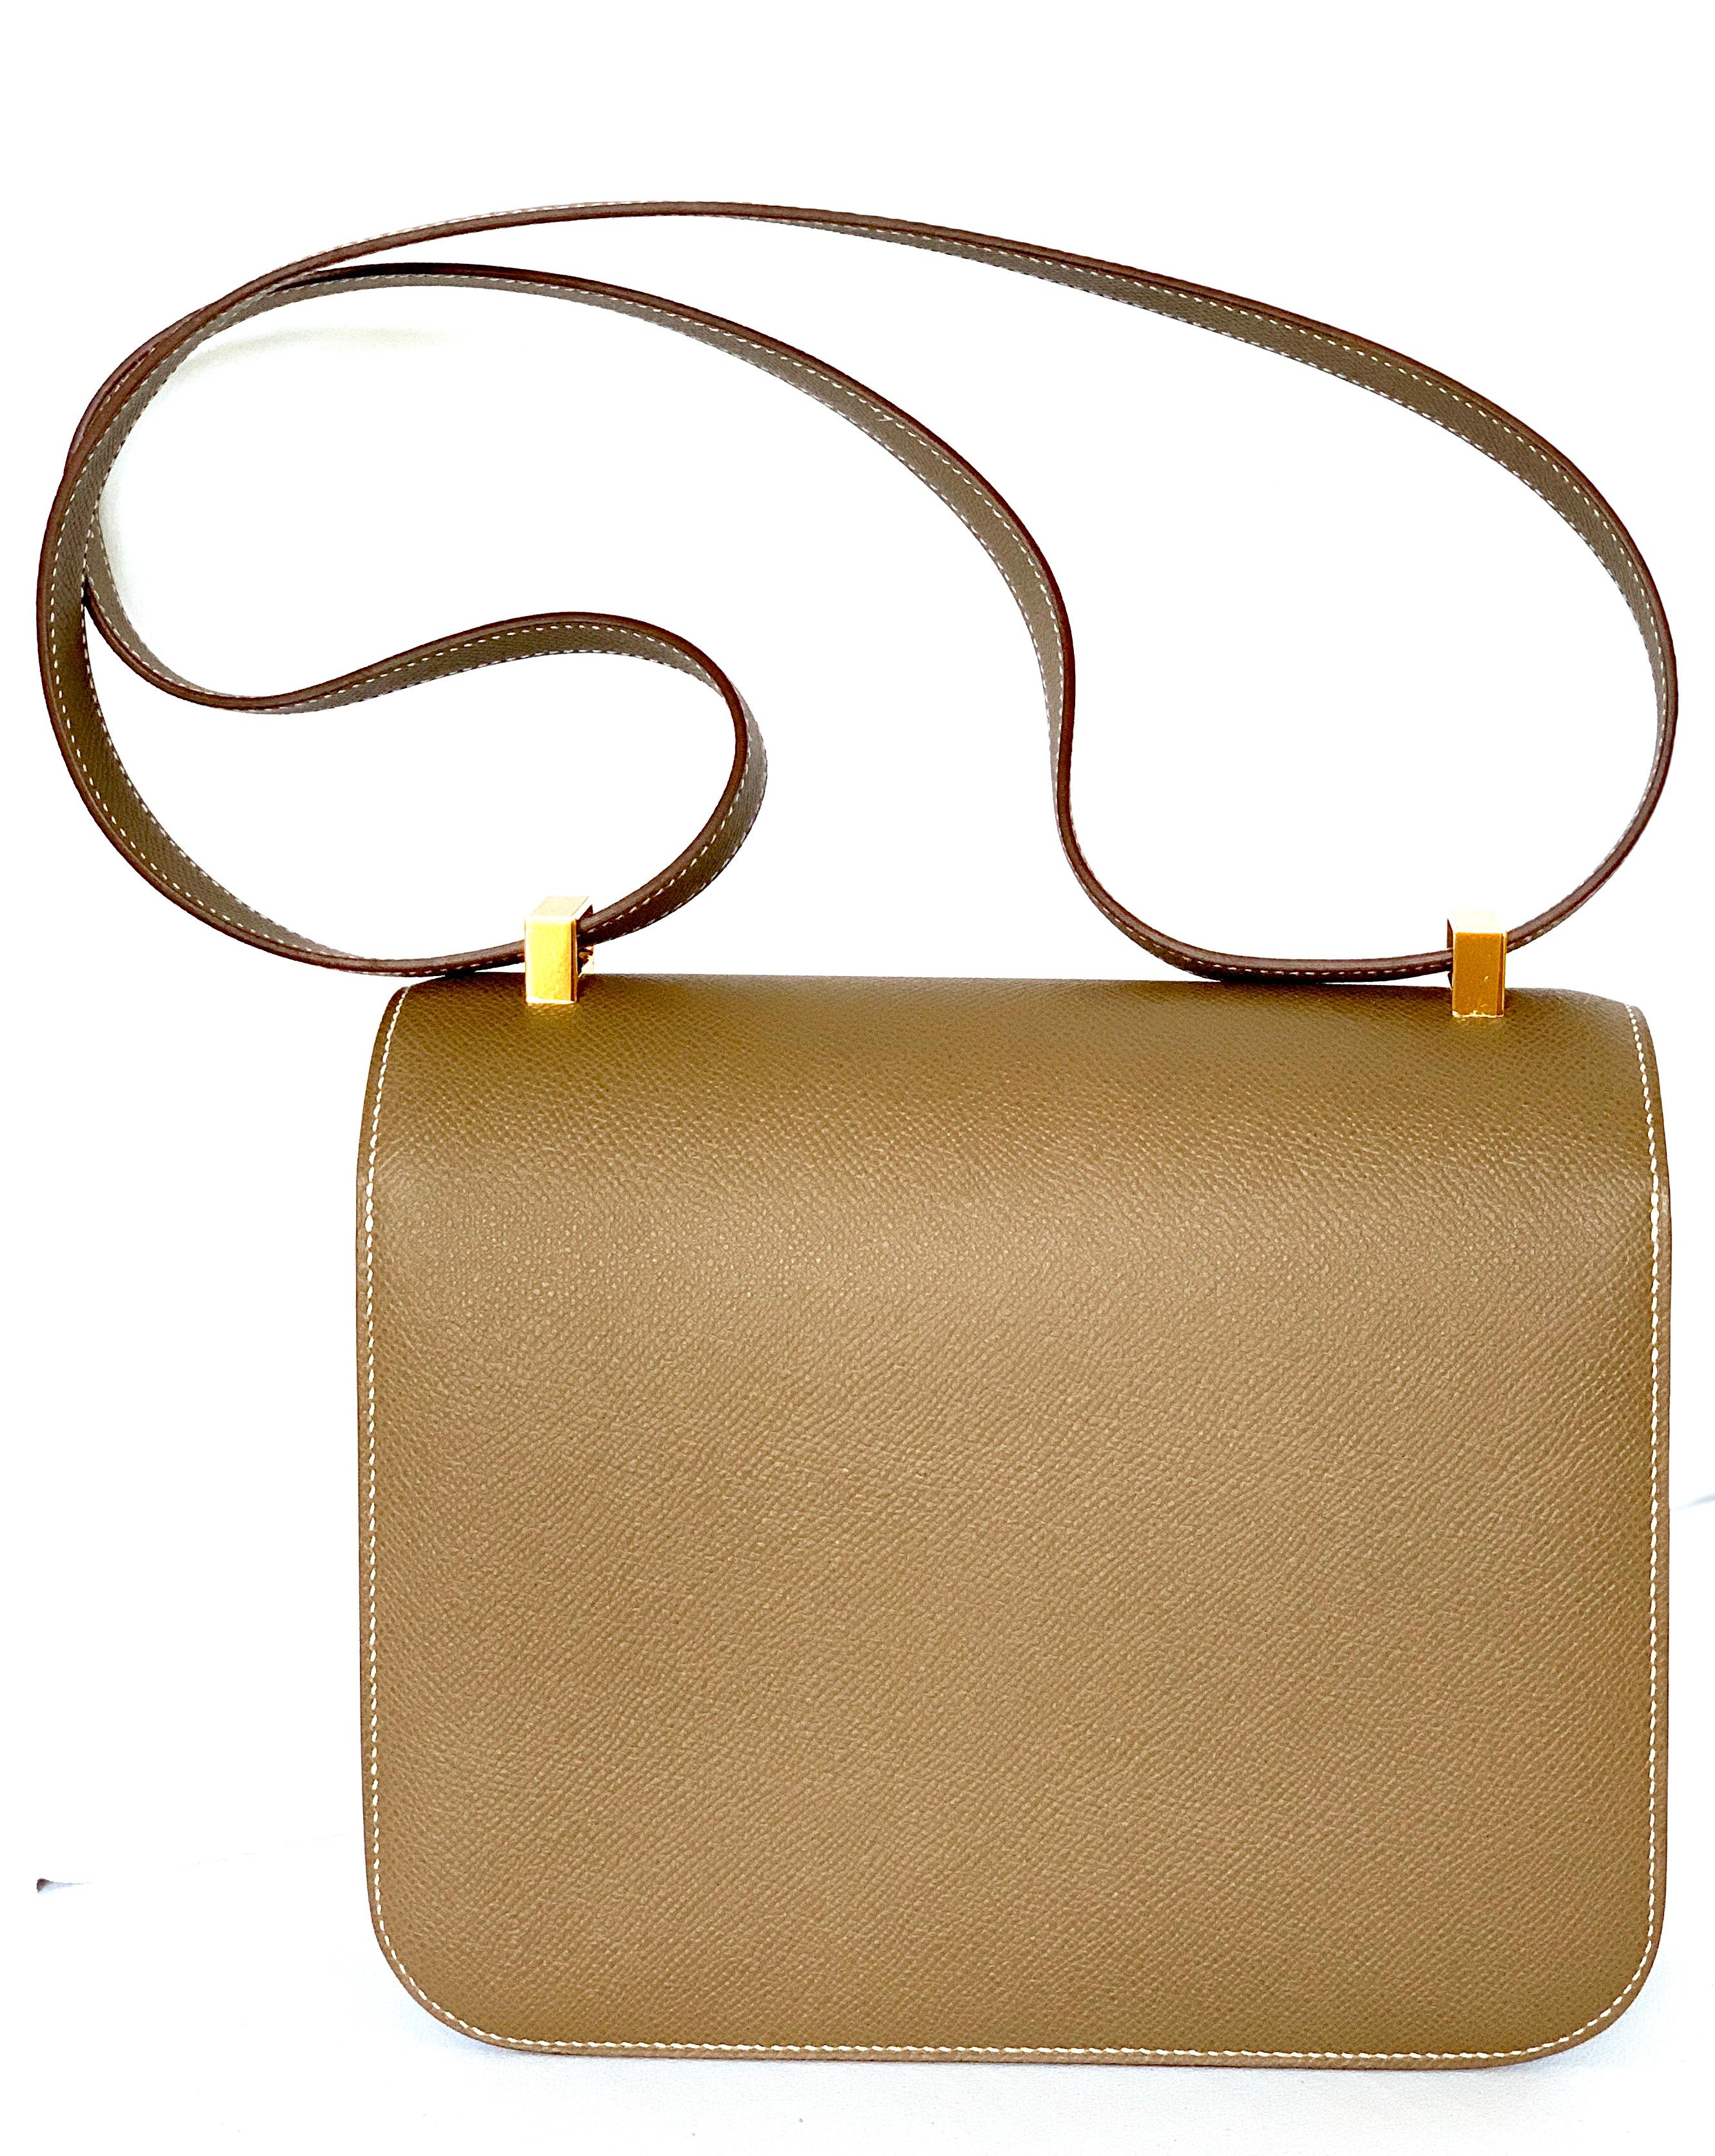 HERMES CONSTANCE BAG
Size 24cm
Etoupe Epsom Leather
Gold Hardware
Brand new 
Plastic on the Measurements
Length: 9 in
Width: 3 in
Height: 7.75 in
Drop: 17.25 in



Comes ready for gift giving, Hermes Box, Tissue, Felt 